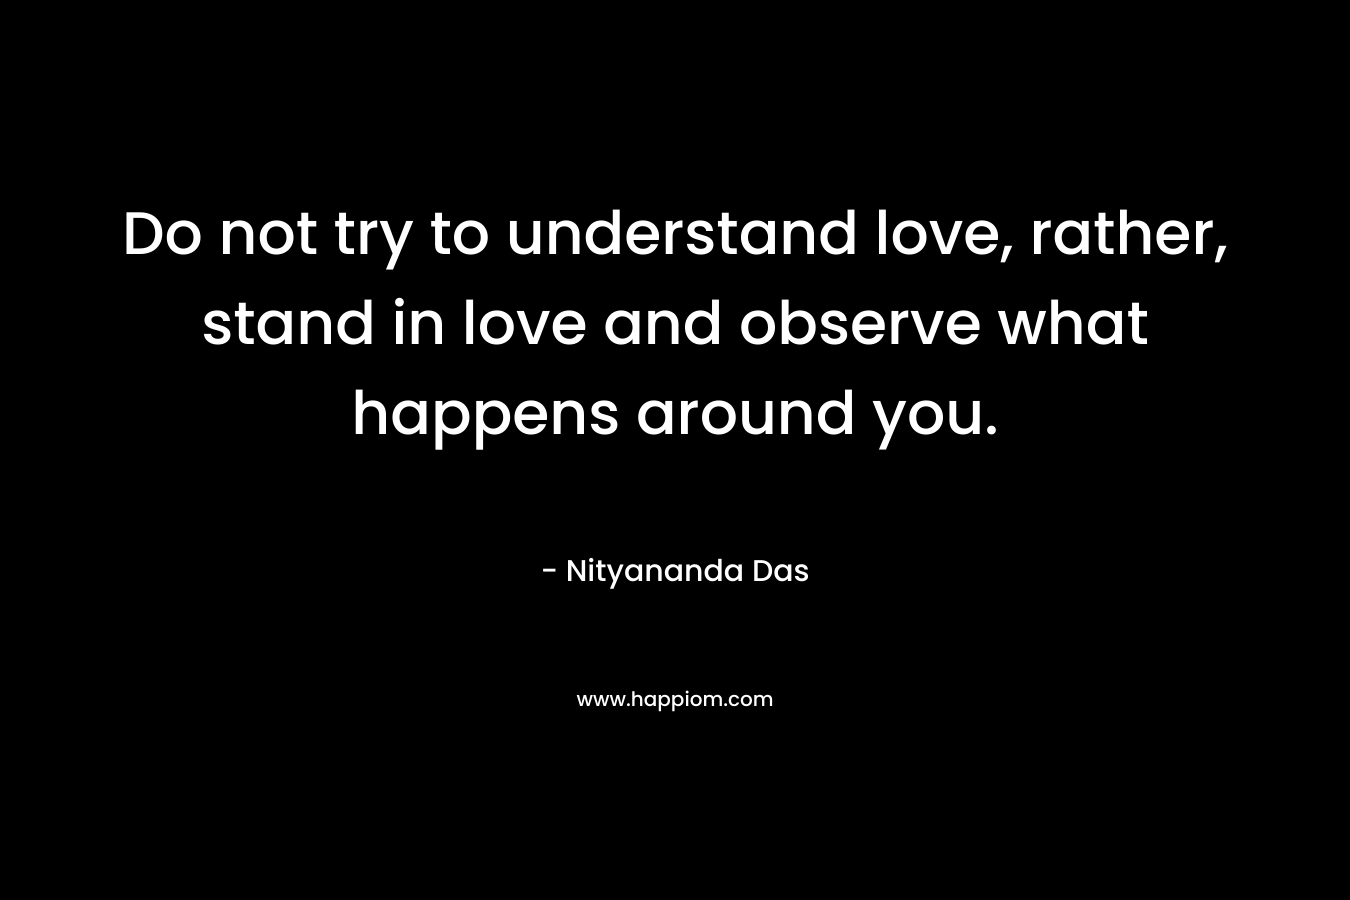 Do not try to understand love, rather, stand in love and observe what happens around you. – Nityananda Das